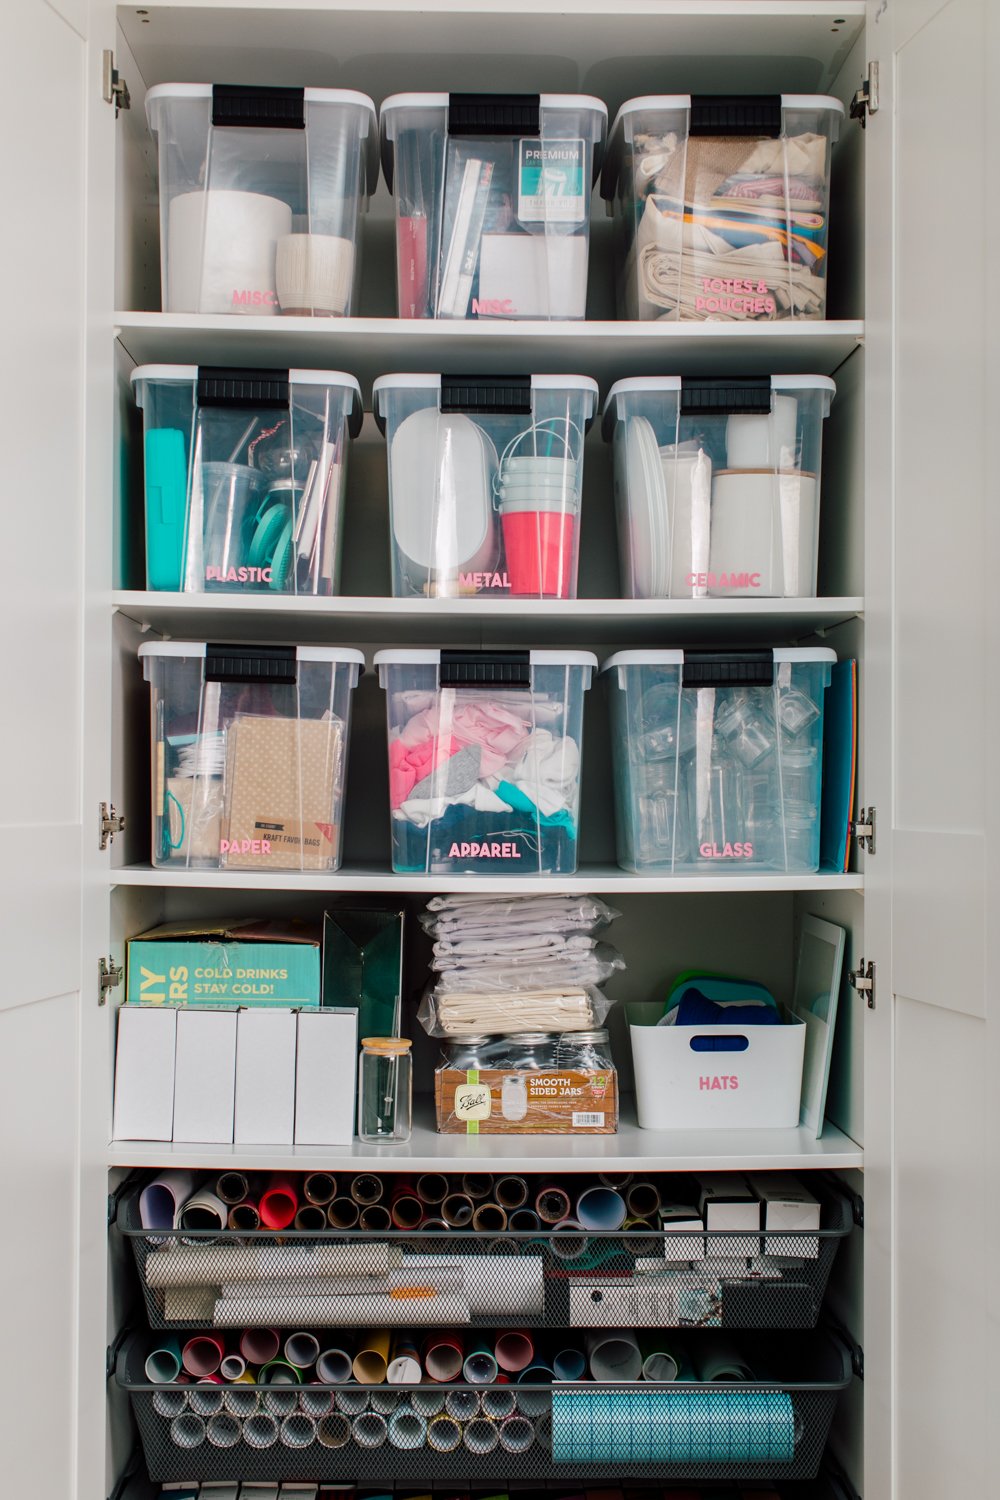 Craft room tour: IKEA Pax cabinet open with nine labeled bins and other supplies.